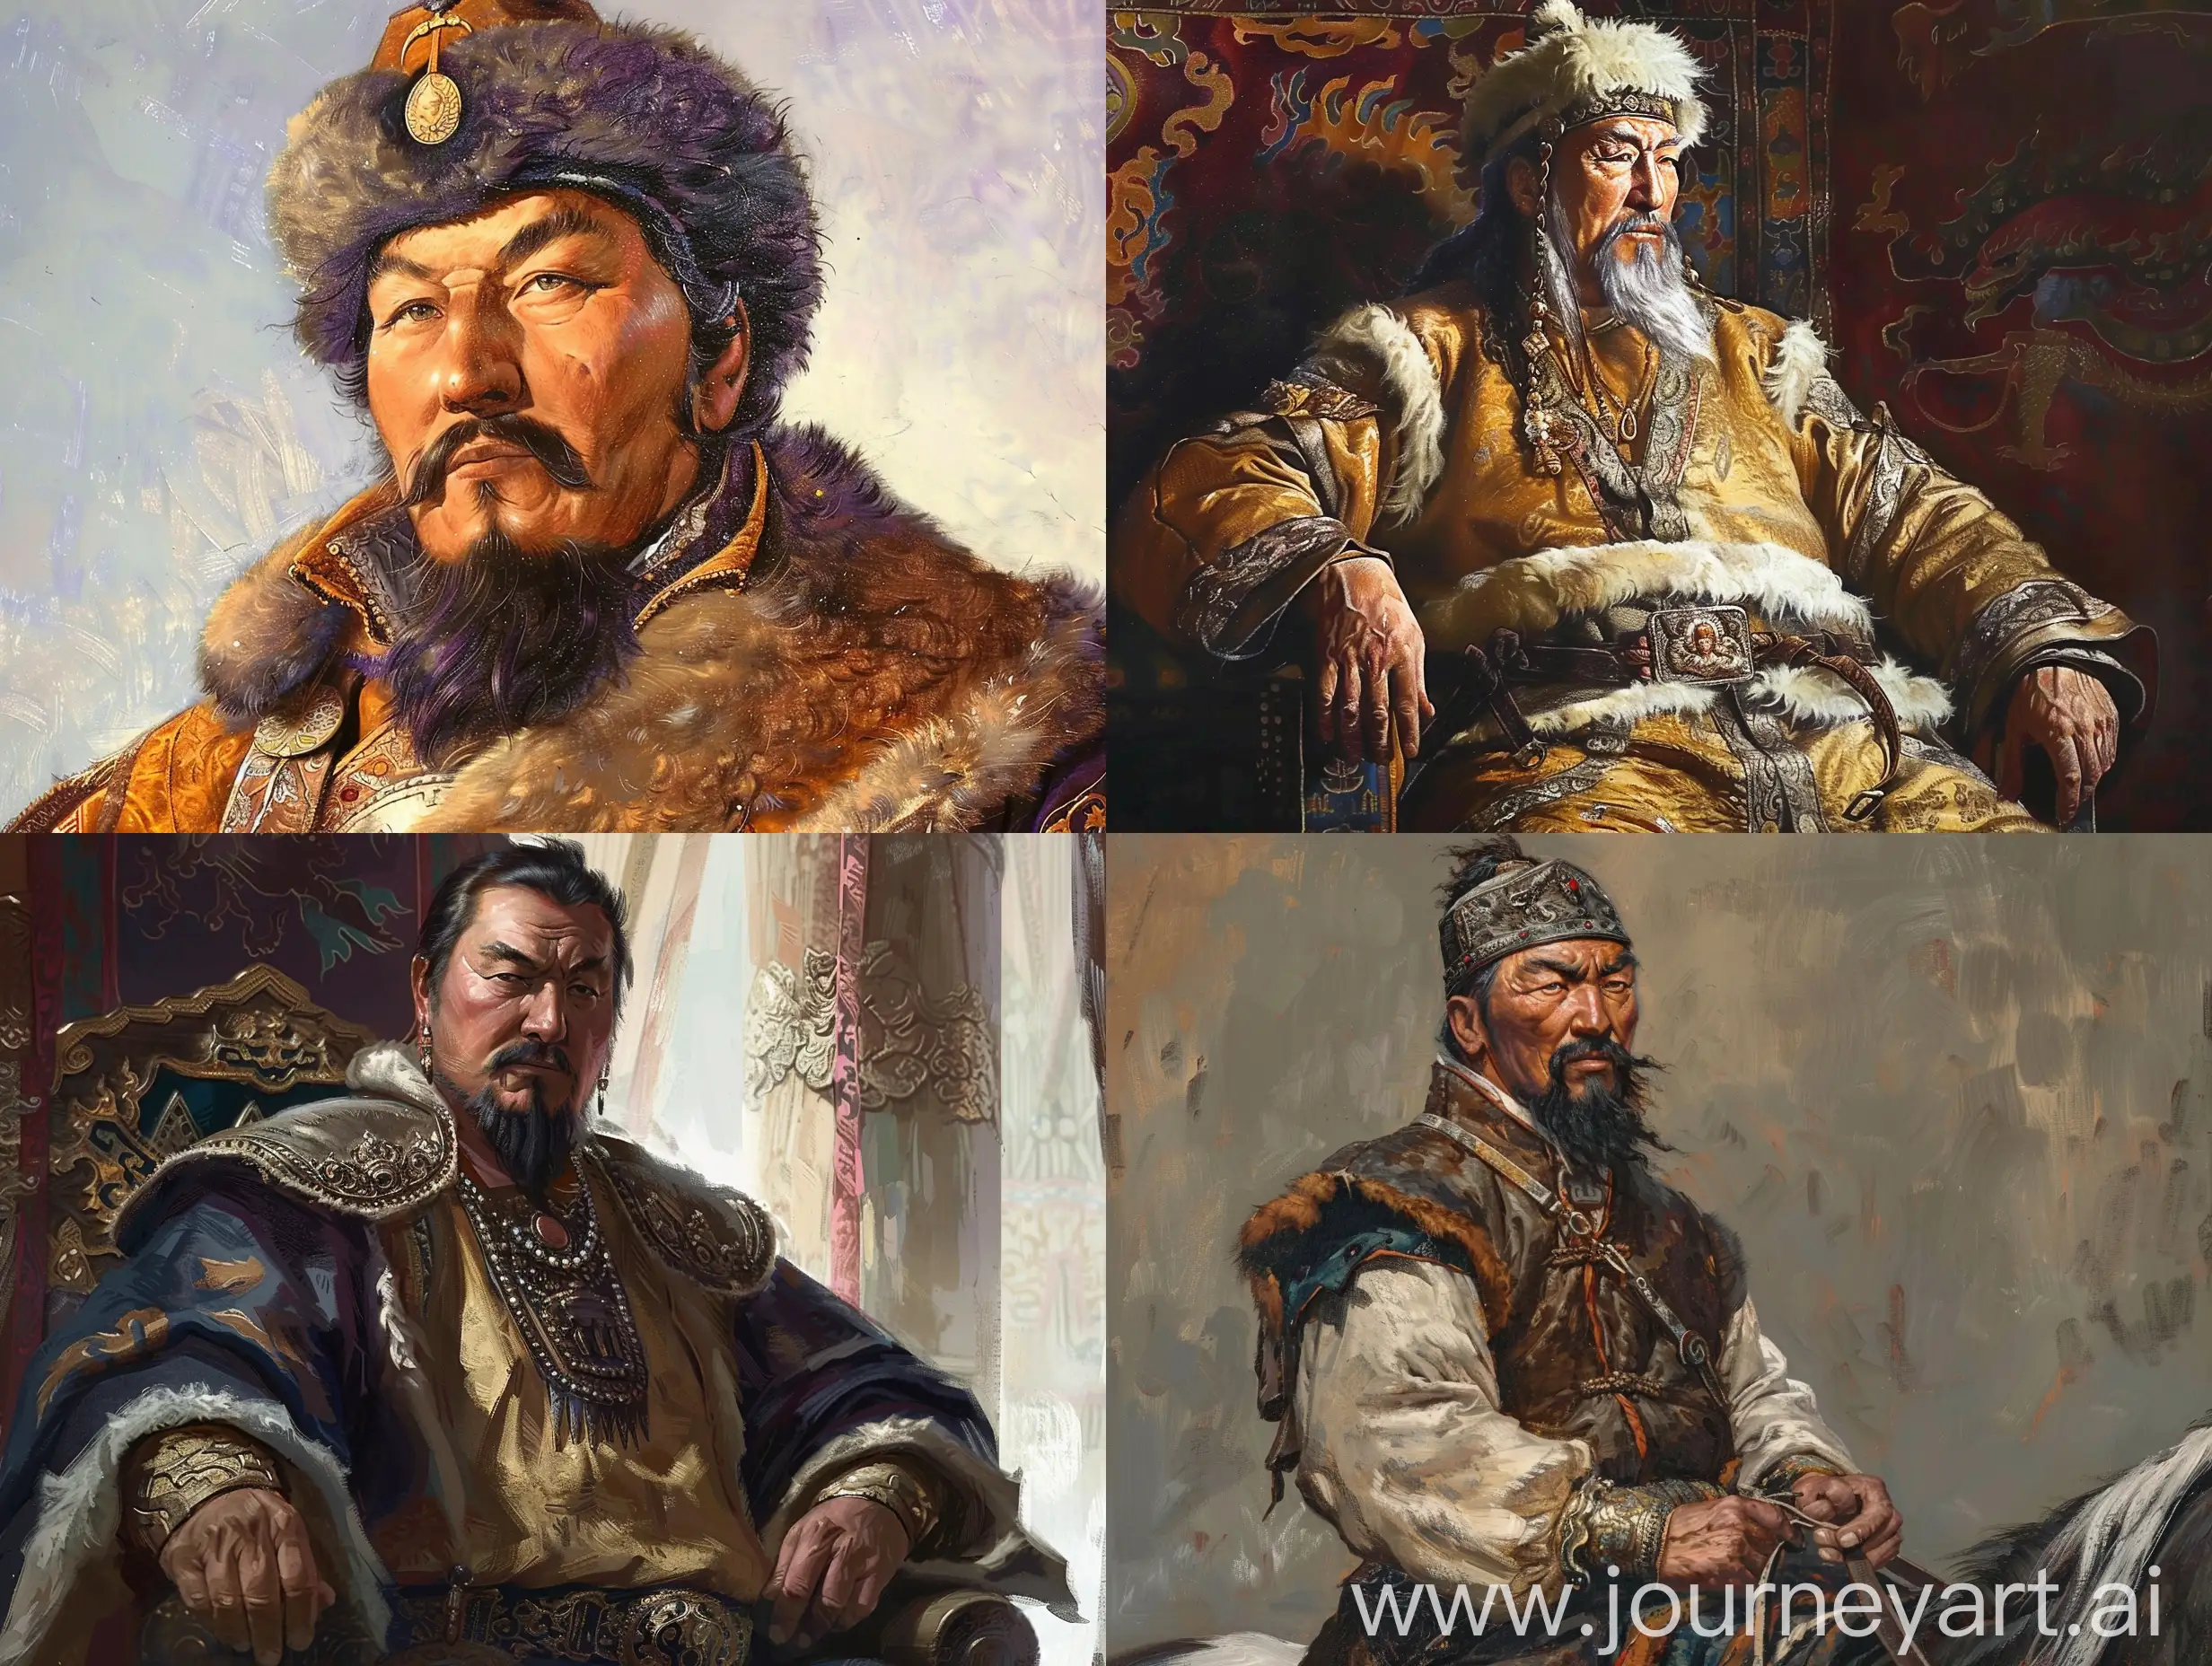 Tumanay Khan's descendants have left an important mark not only in Mongolian history but also in world history. The great-grandfather of Genghis Khan through his eldest son Habul Khan, Tumanay was also the ancestor of Emir Timur, the founder of the Timurid Empire in Central Asia, through his second son Haduli and his grandson Qarachar Barlas.